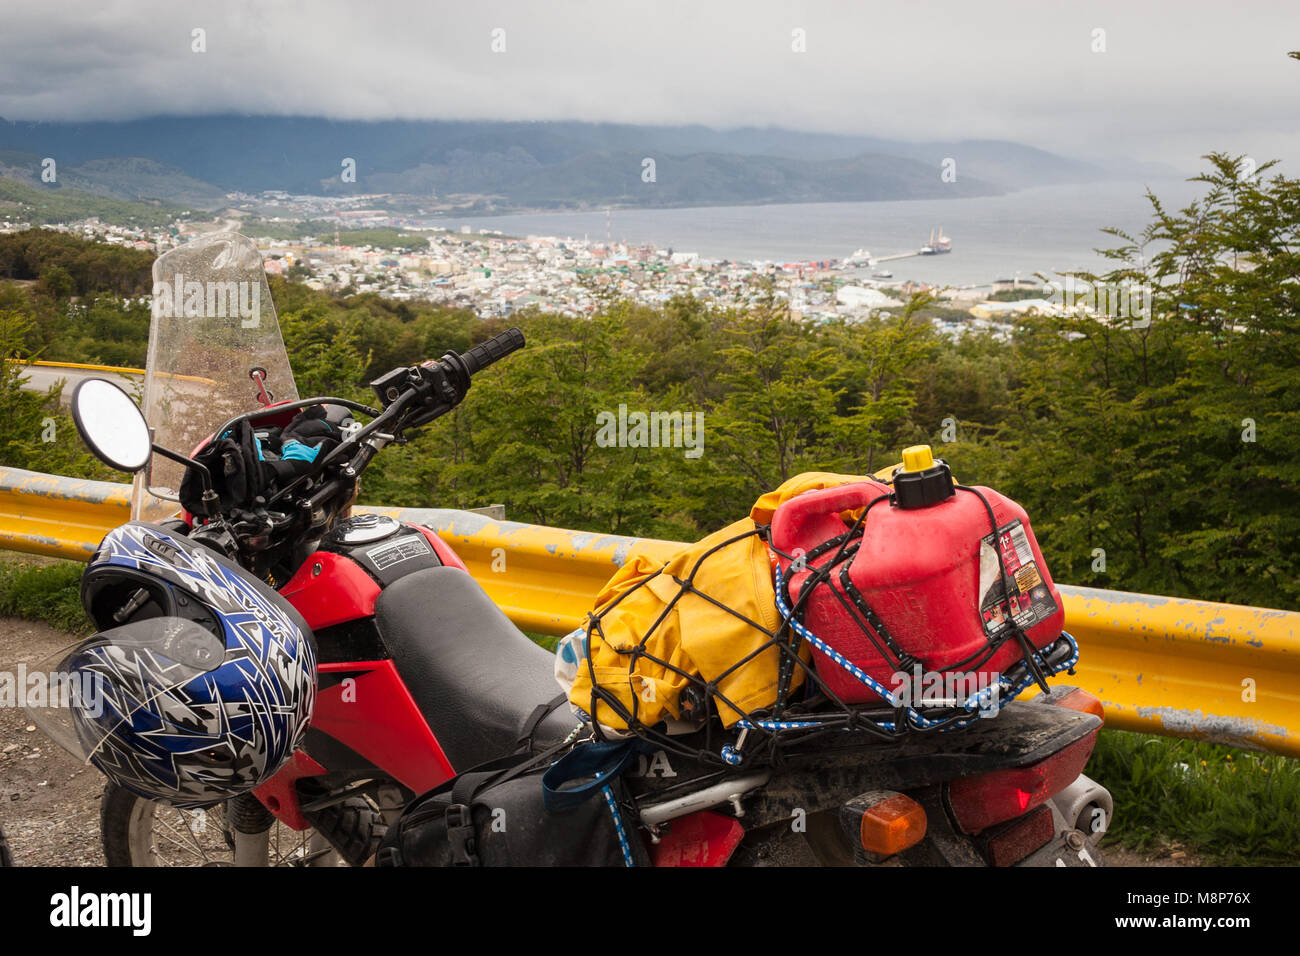 Motorcylists gather once a year in Ushuaia, Argentina, for the meet known as 'Latitude 54.' Stock Photo